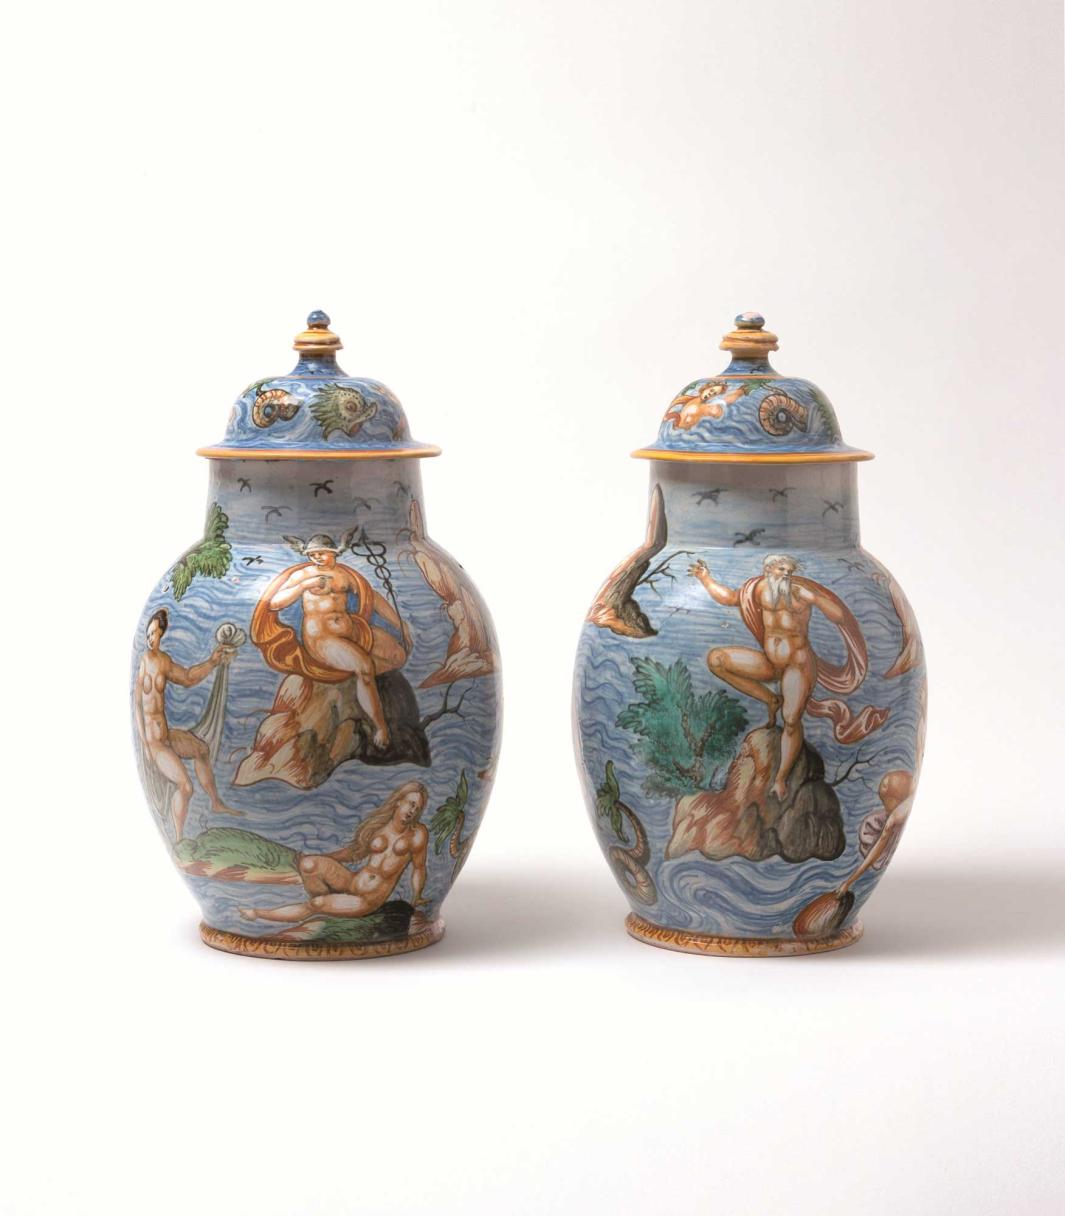 Two earthenware vases with seascape scenes of nude figures sitting on rocks and sea creatures in the water.